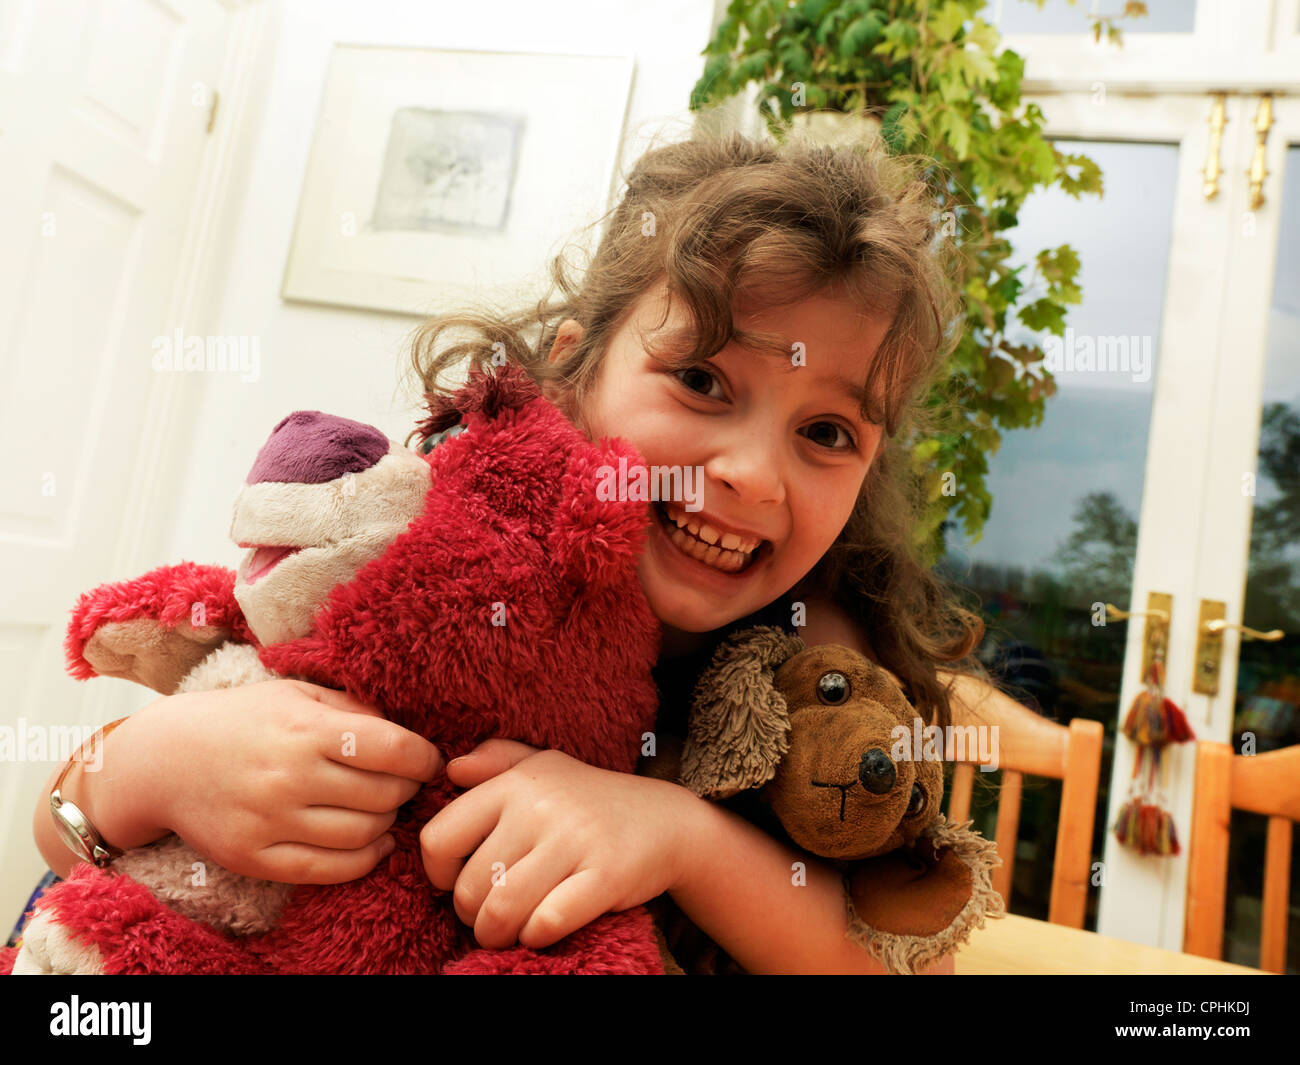 Young Girl Hugging A Pink Teddy Bear And A Cuddly Dog Surrey England Stock Photo